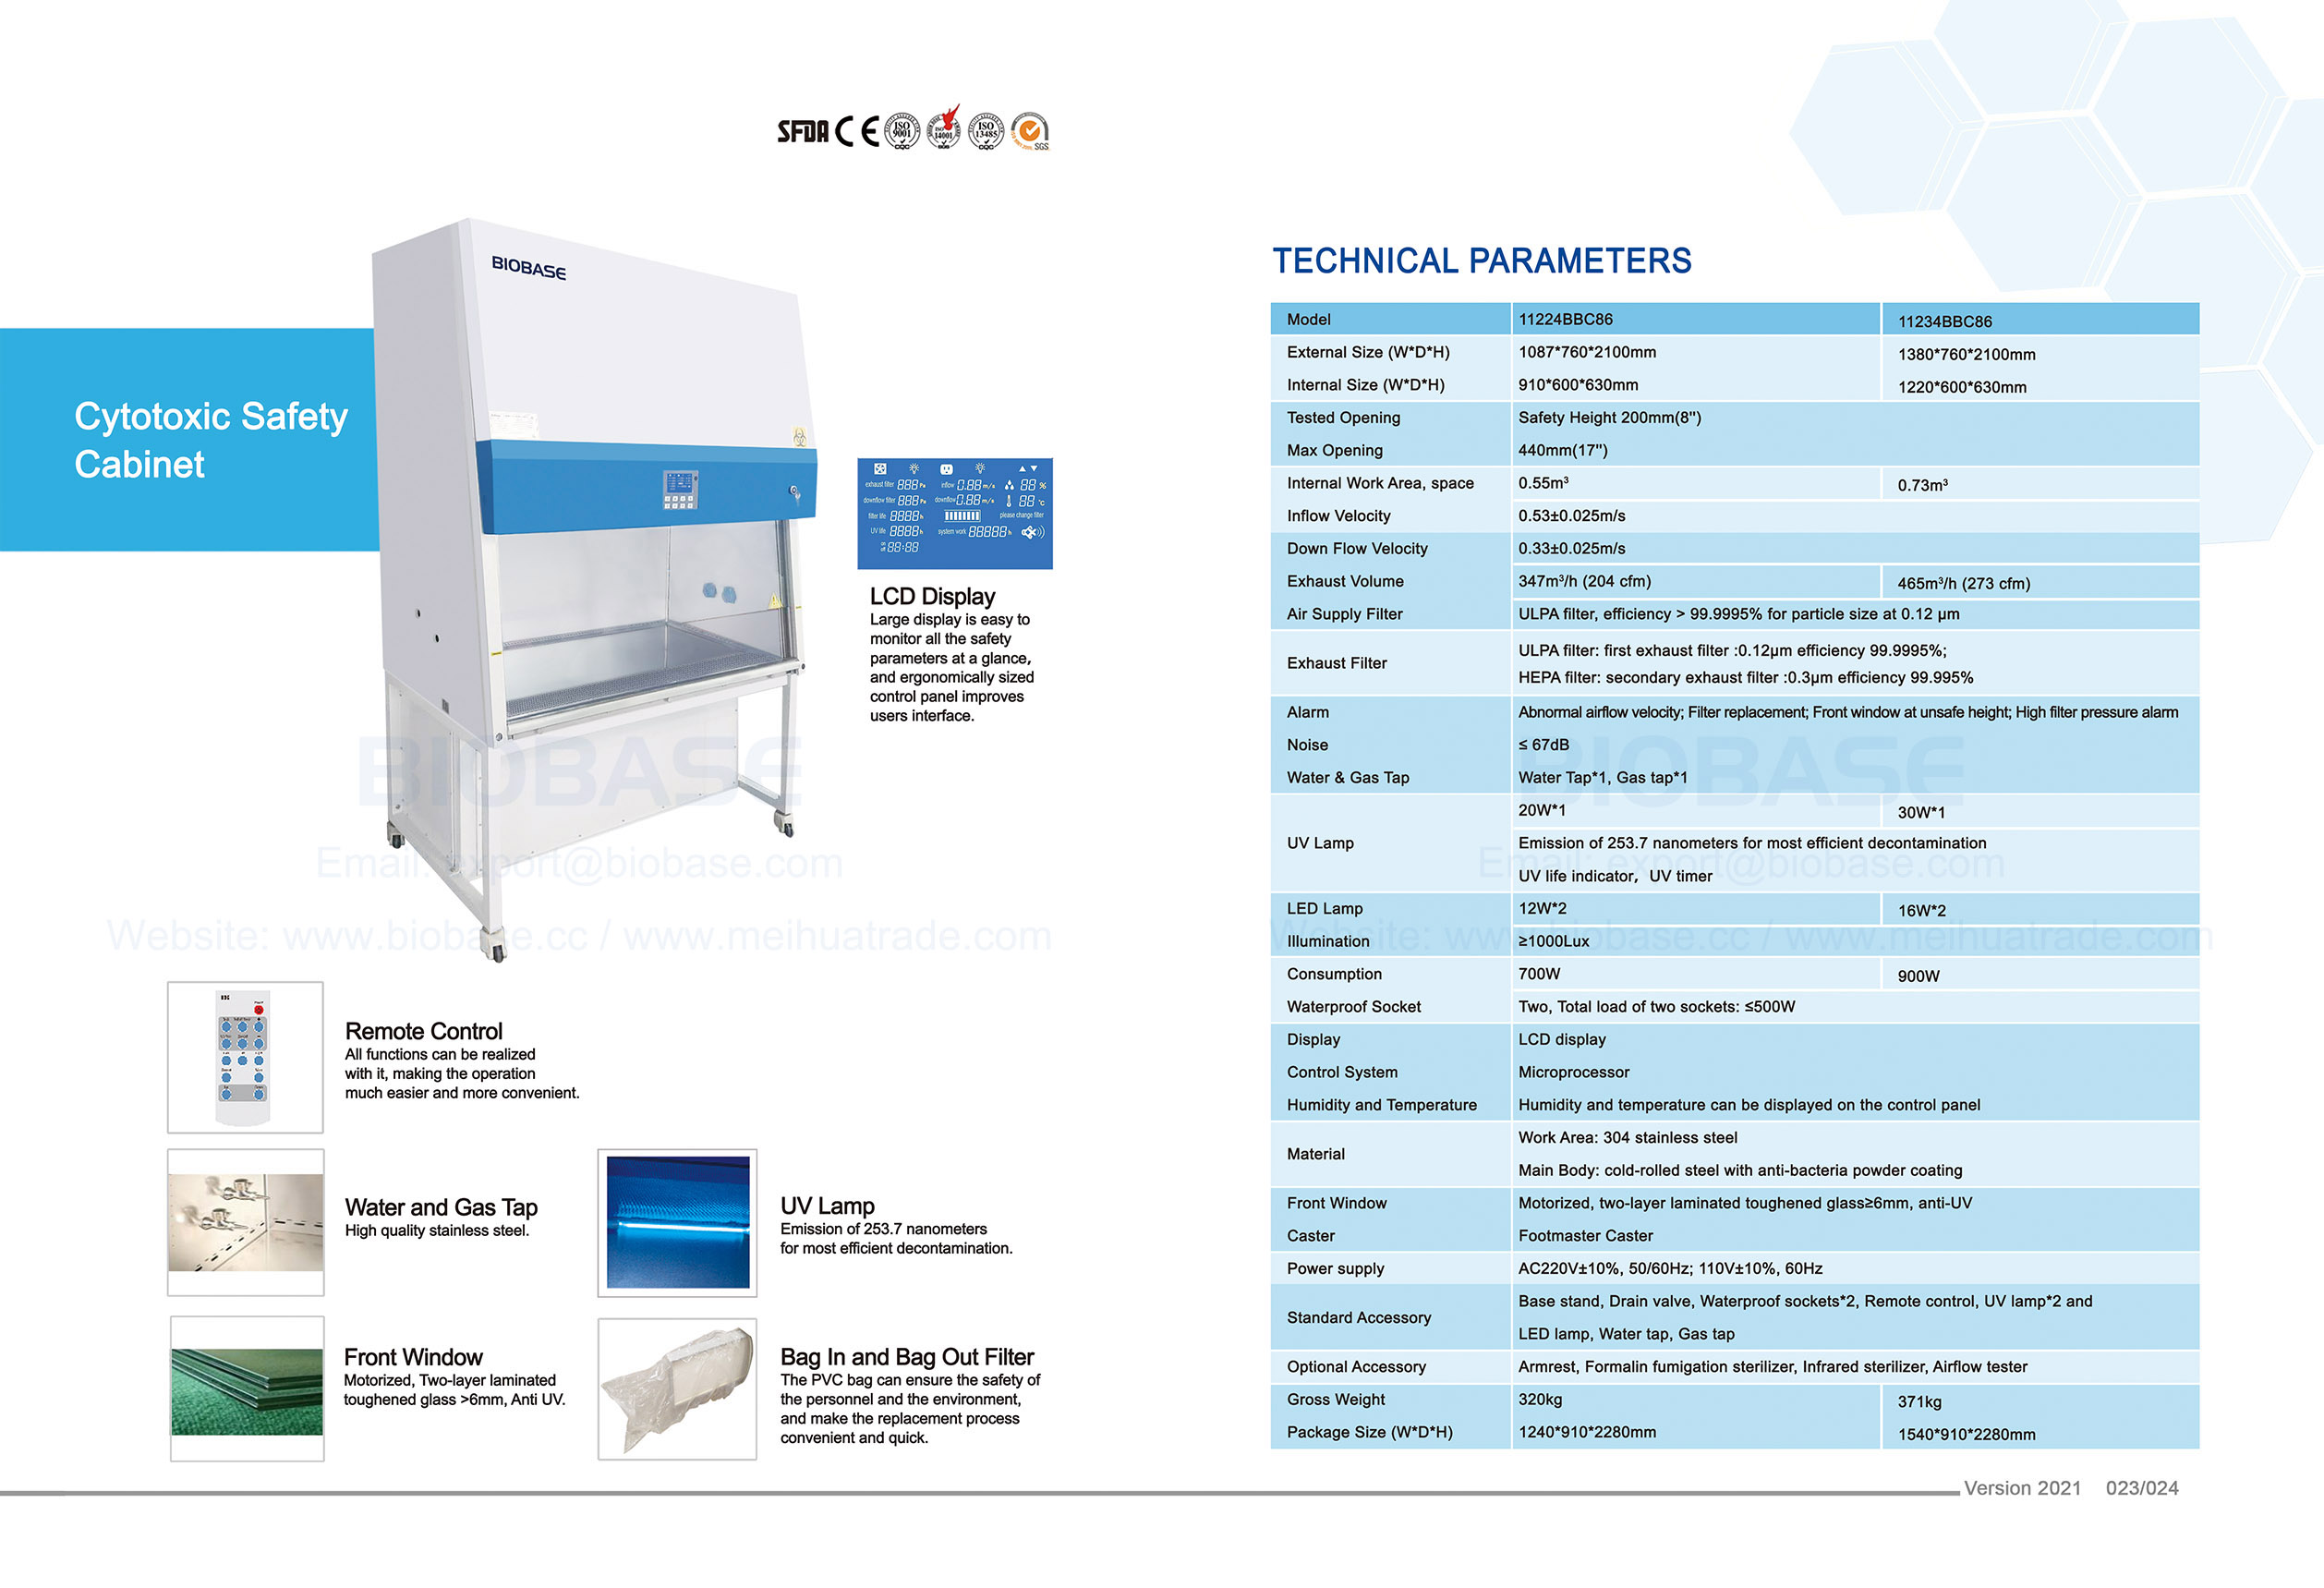 23-24 Cytotoxic Safety Cabinet